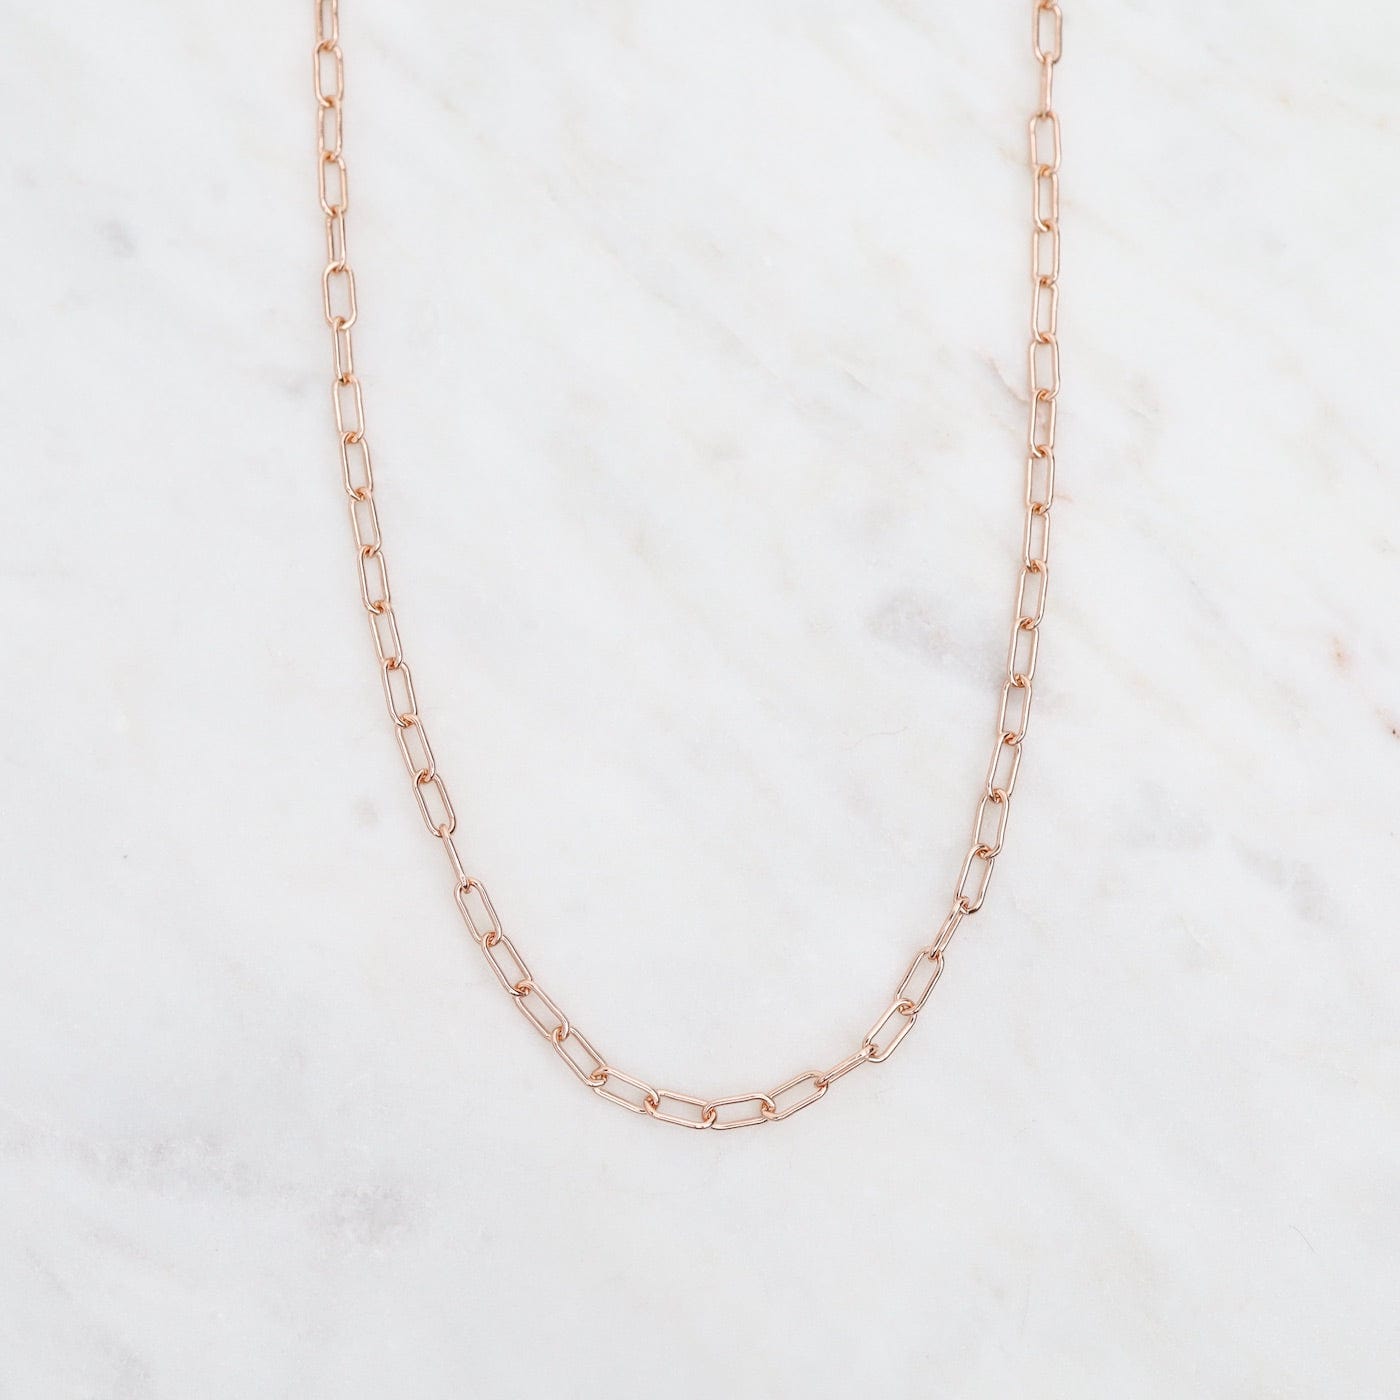 NKL-GF 20" Rose Gold Filled Round Drawn Cable Chain Necklace